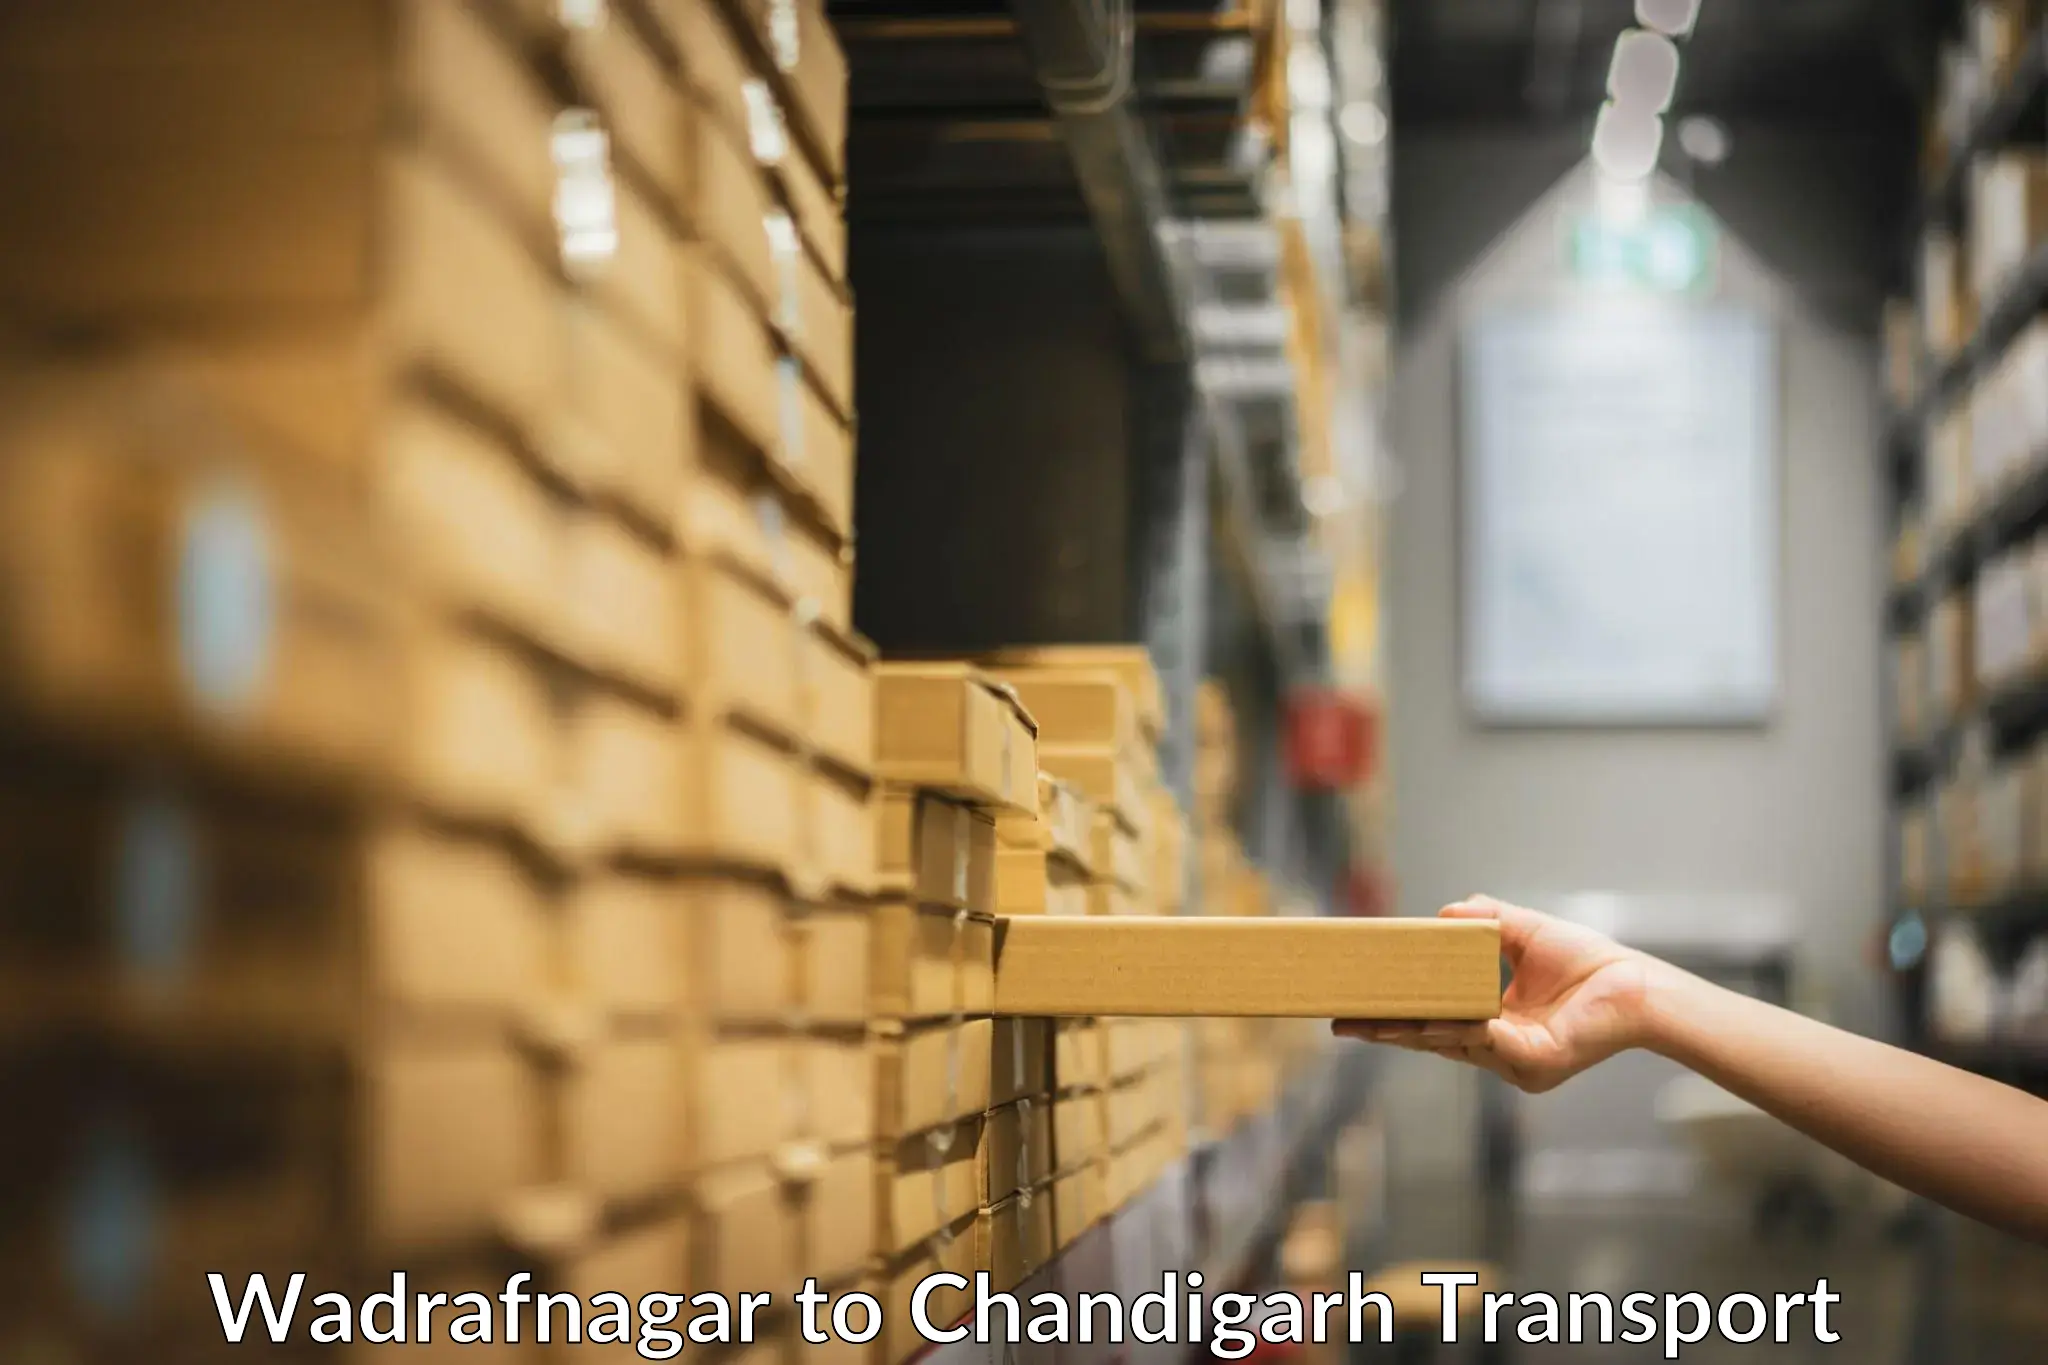 Package delivery services Wadrafnagar to Chandigarh